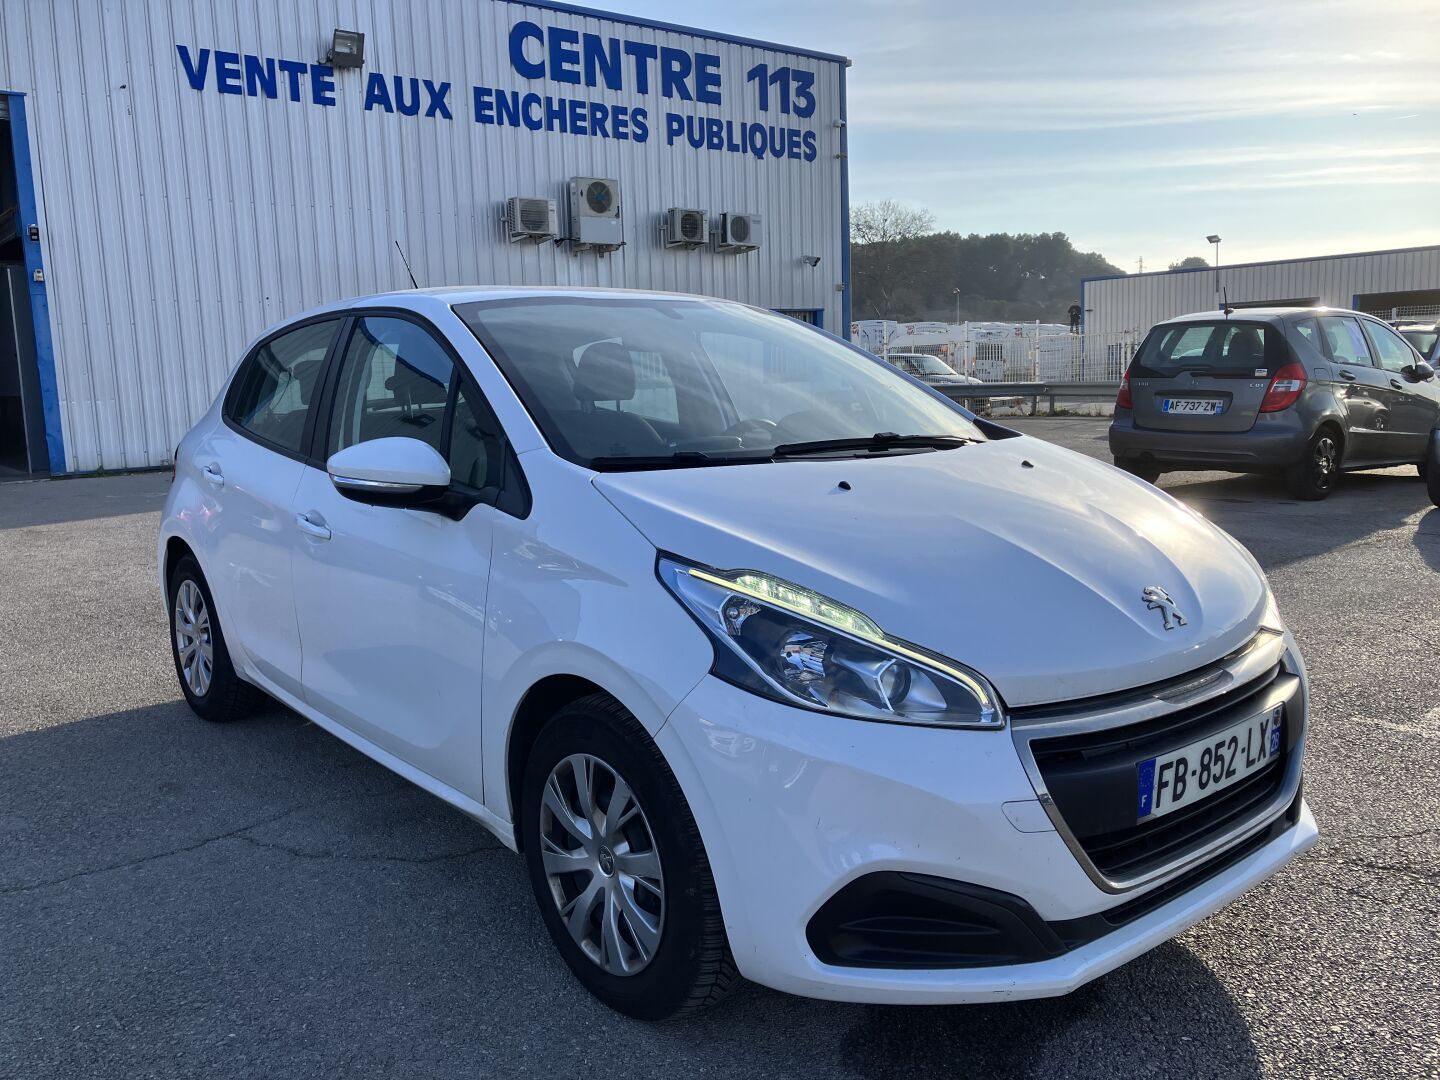 Null 208 1.2 PTEC 83 HP
VP PEUGEOT 208 1.2 PTEC 83 HP
Body : CI
Serial number ty&hellip;